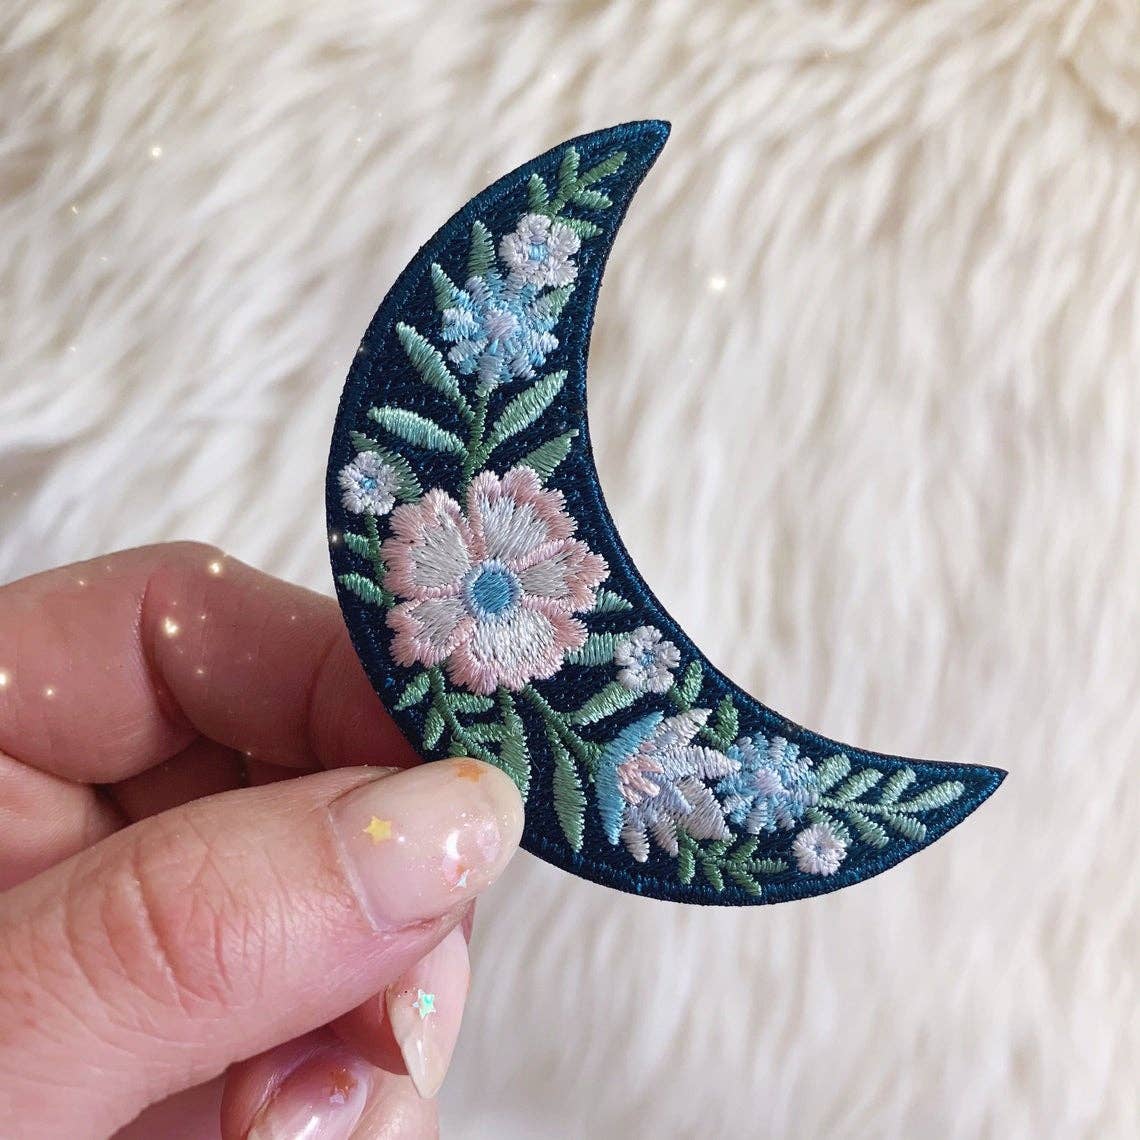 Botanical Crescent Moon Patch - Moon Room Shop and Wellness